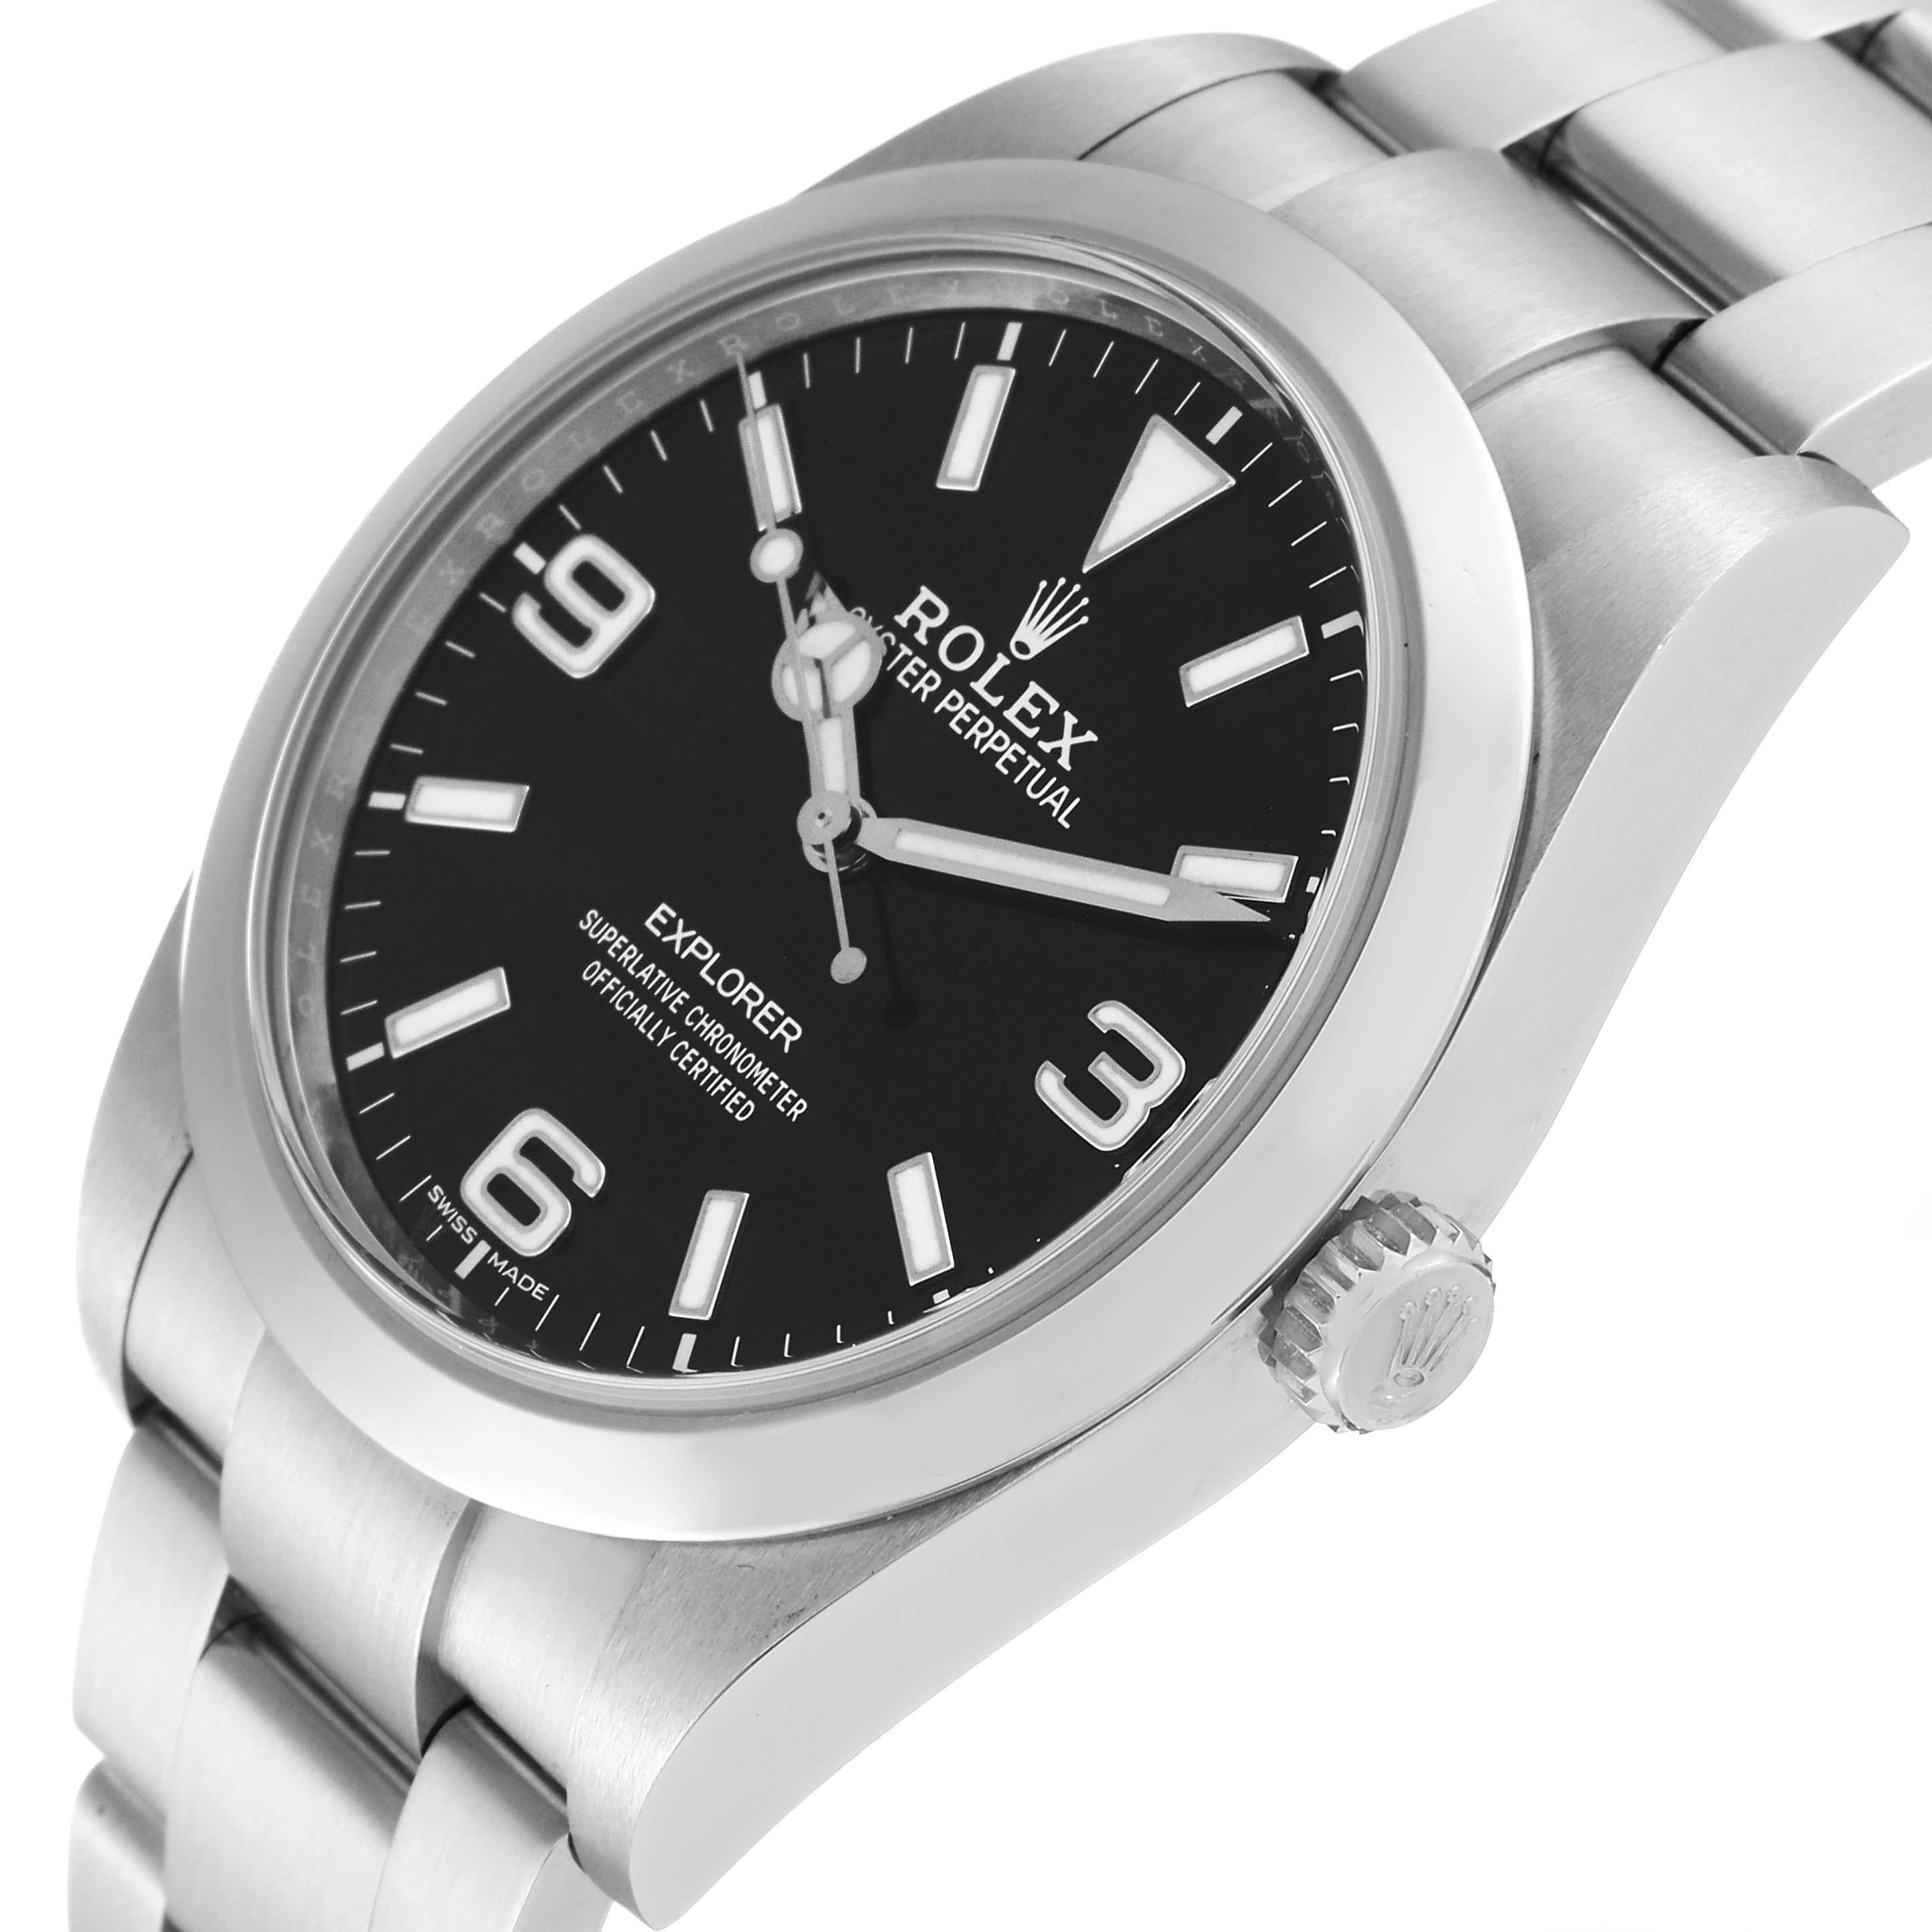 Rolex Explorer I 39mm Black Dial Steel Mens Watch 214270. Officially certified chronometer automatic self-winding movement. Stainless steel case 39 mm in diameter. Rolex logo on the crown. Stainless steel smooth bezel. Scratch resistant sapphire